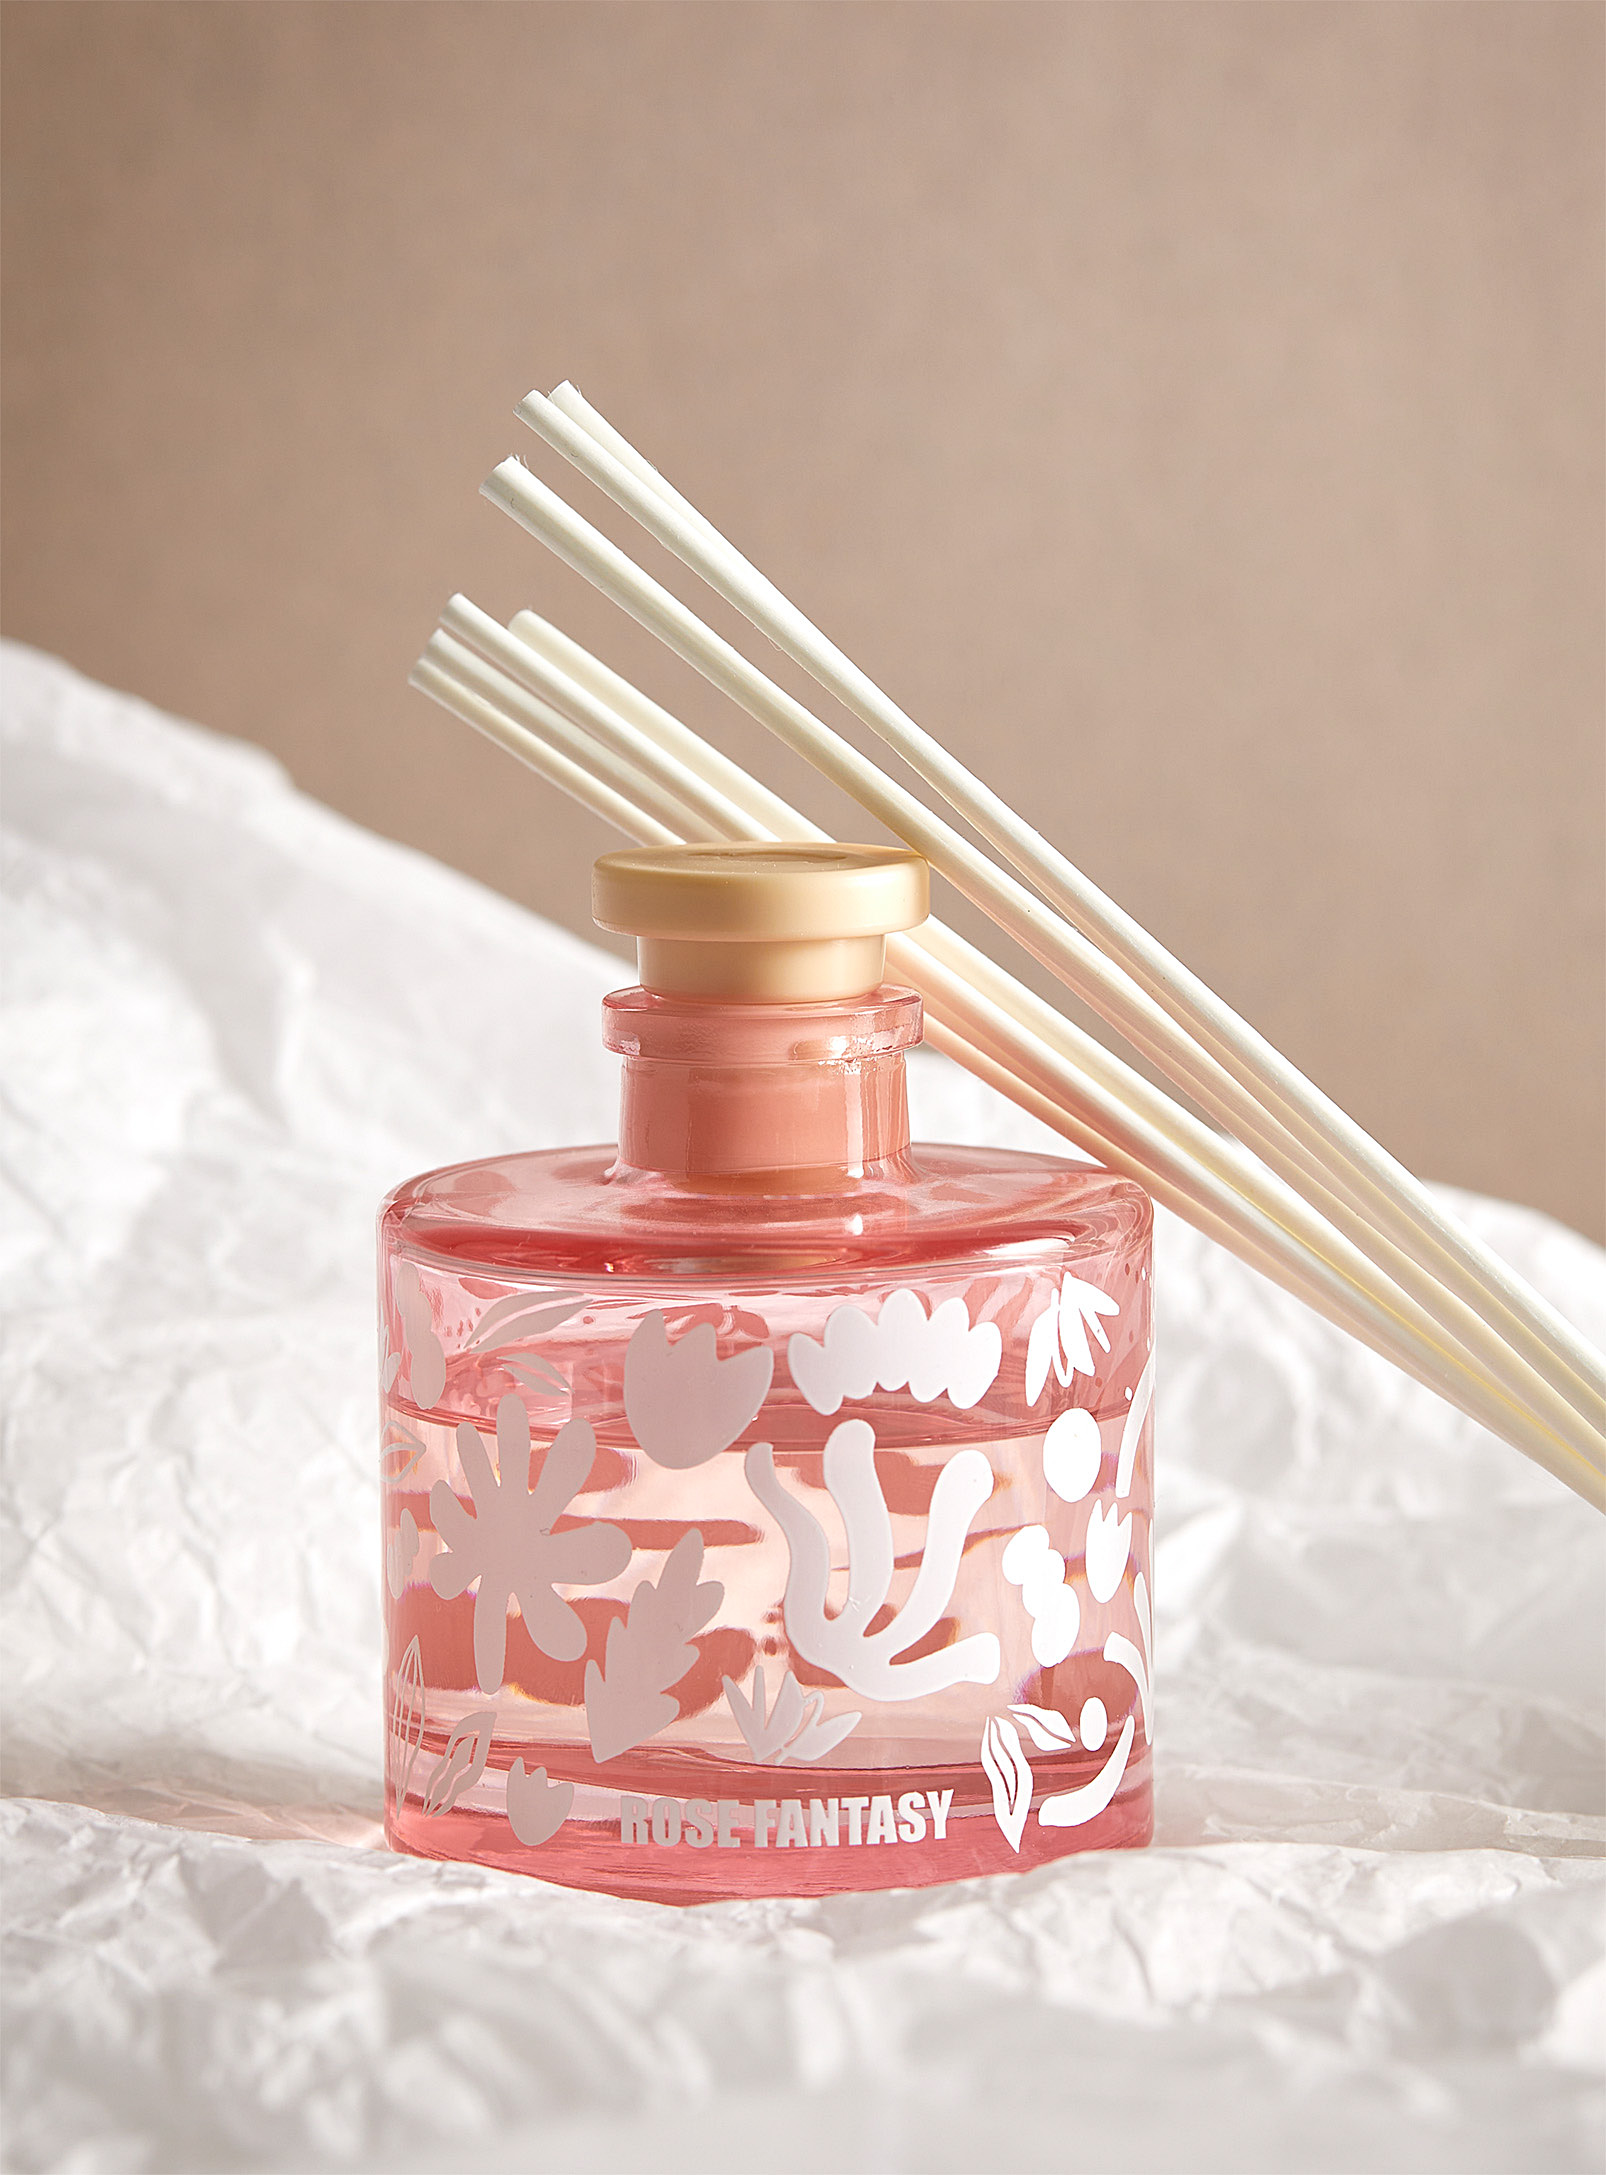 Simons Maison Rose Fantasy Diffuser In Pink